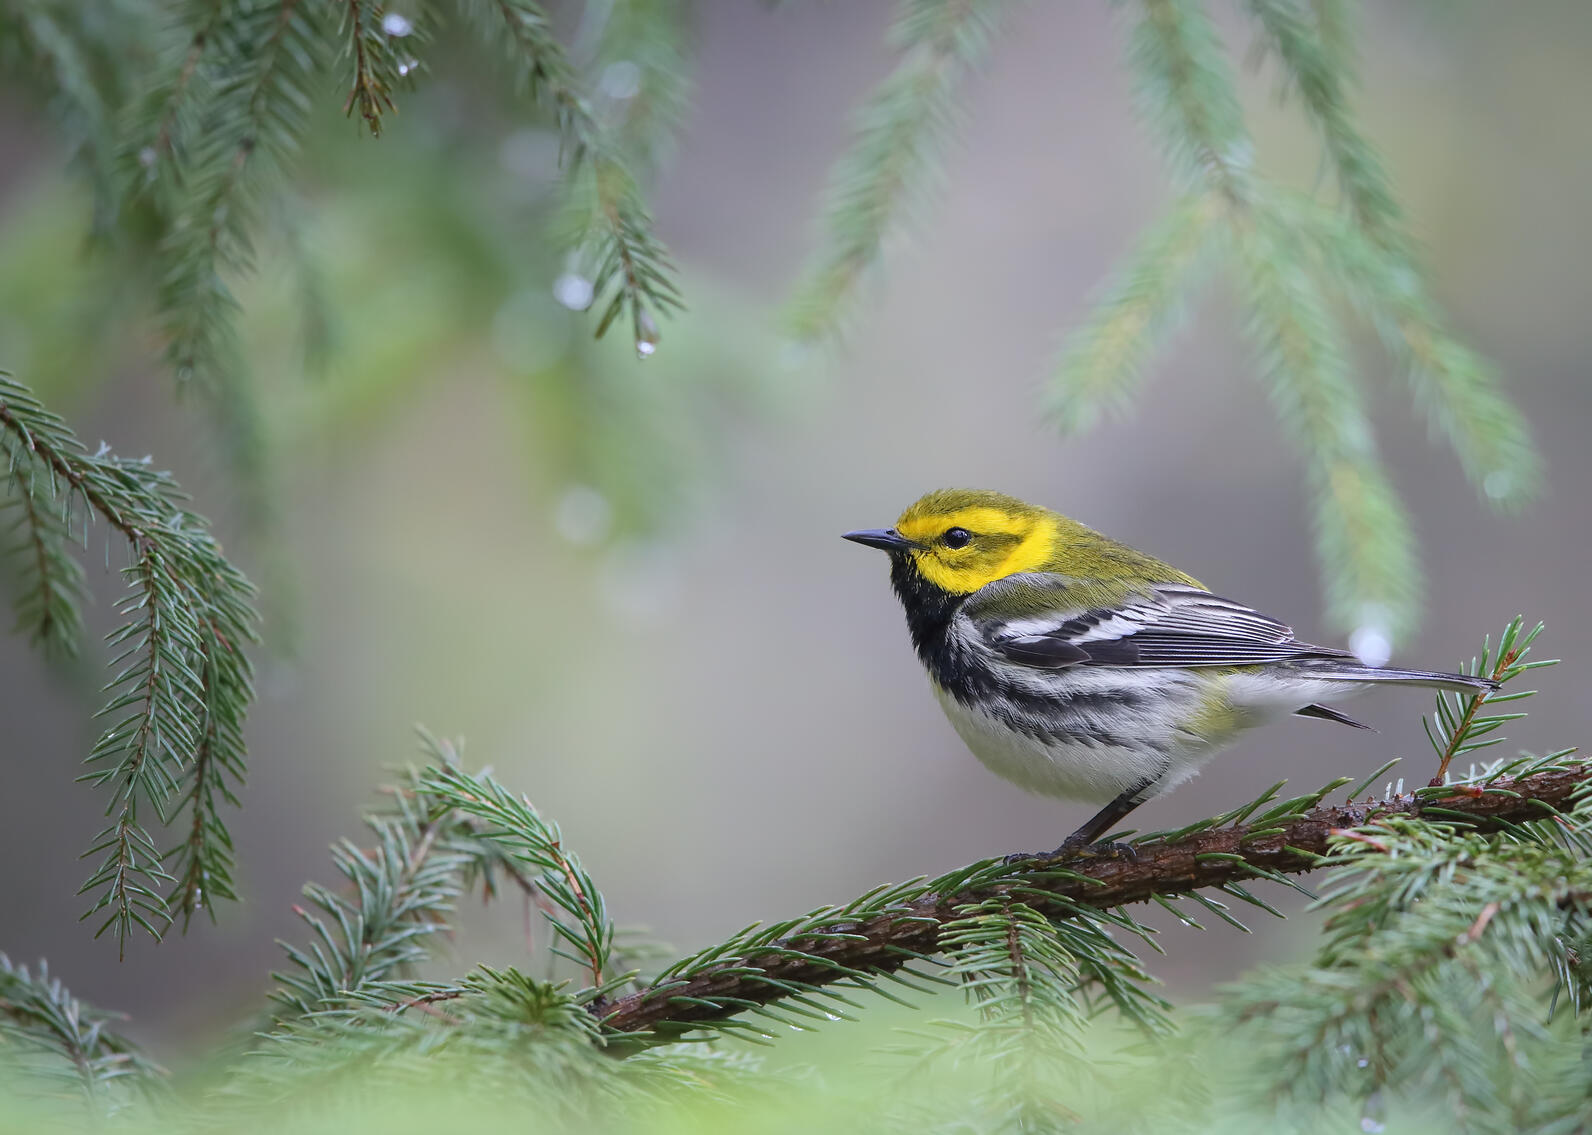 A Black-throated Green Warbler sits on a coniferous tree branch. You can see its yellow head, greenish back, and lack throat.